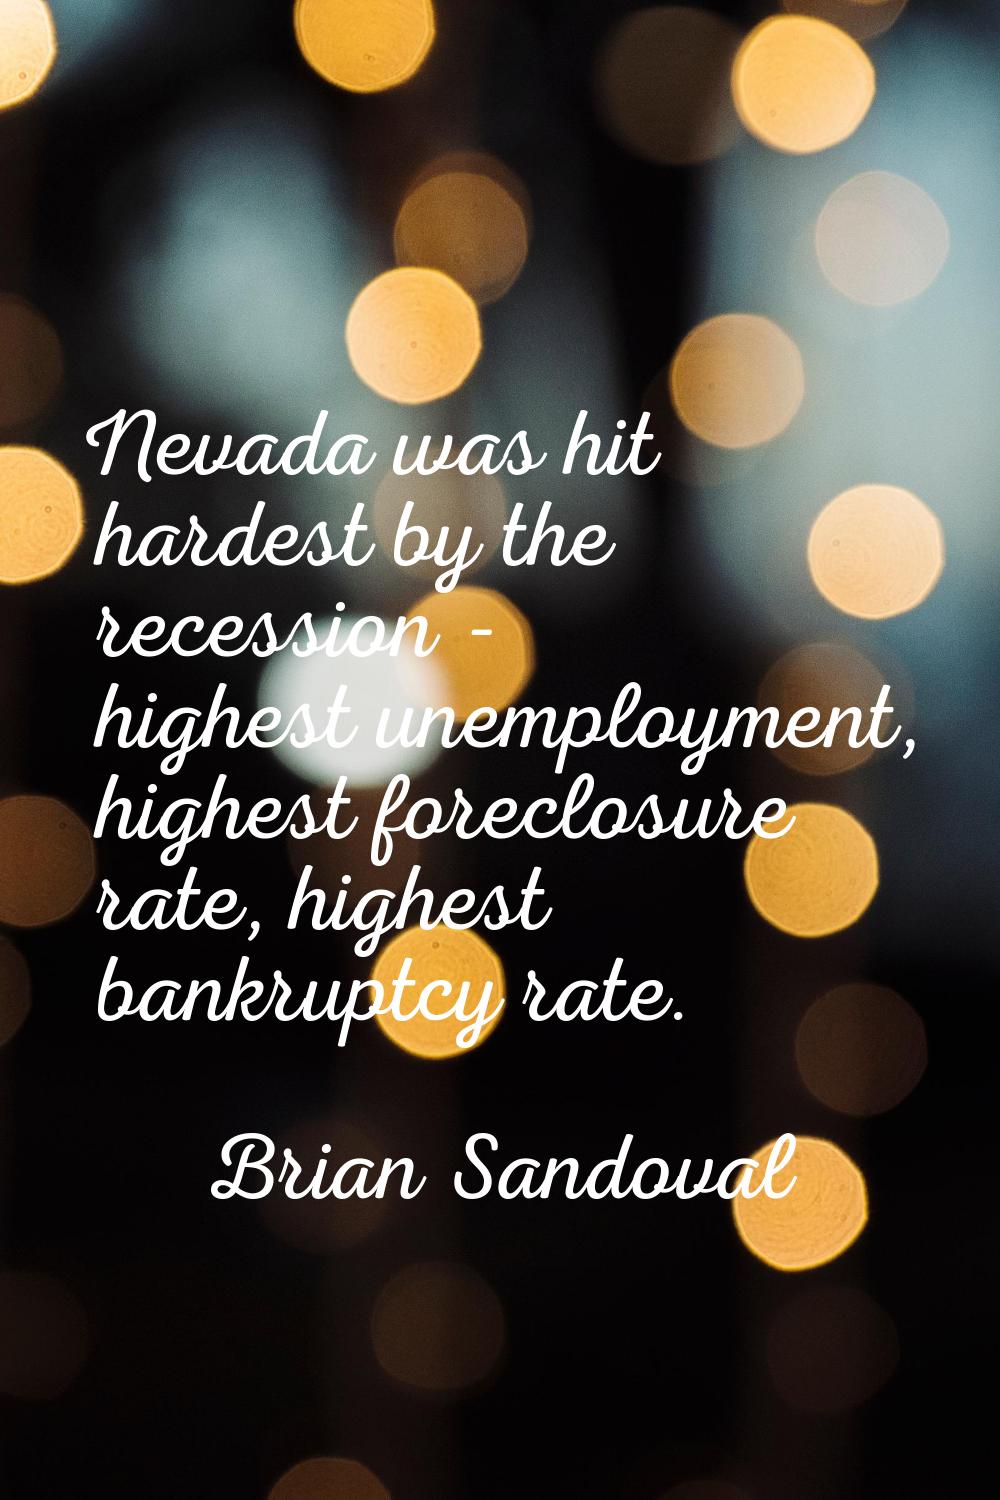 Nevada was hit hardest by the recession - highest unemployment, highest foreclosure rate, highest b